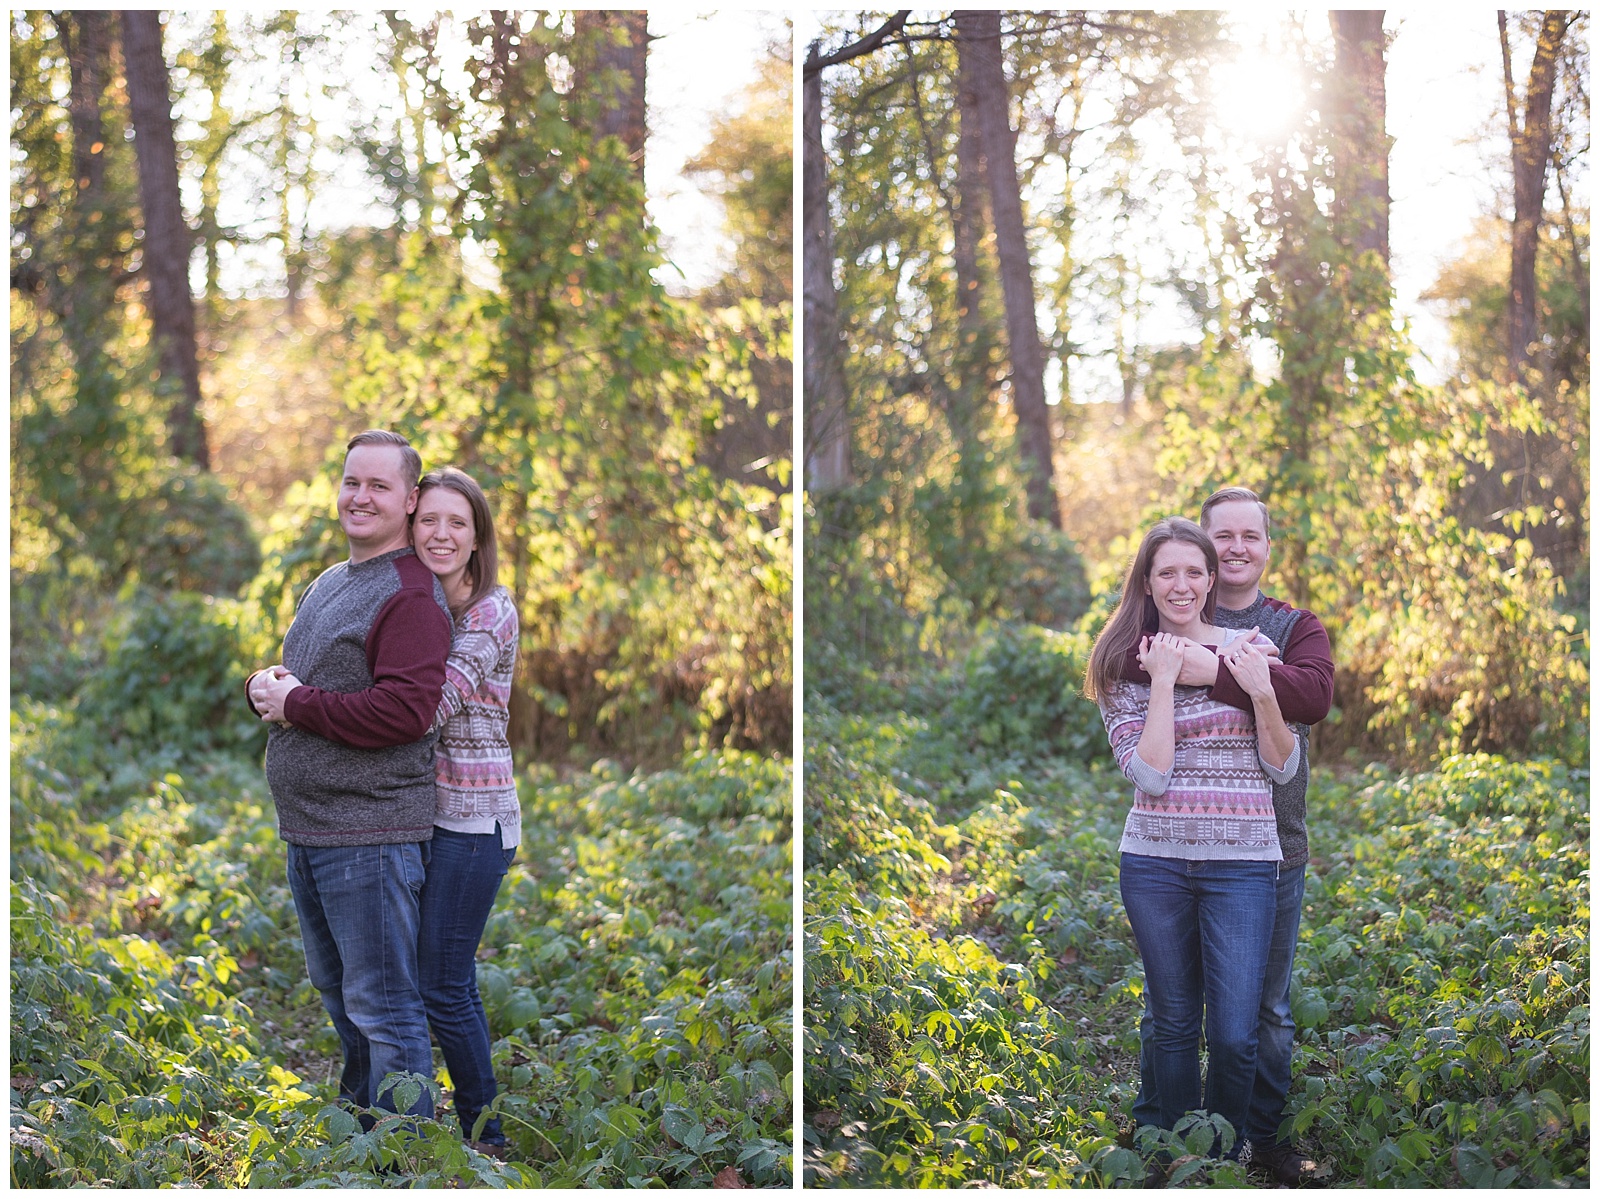 Fall Engagement Session | Monica Brown Photography, monicabrownphoto.com